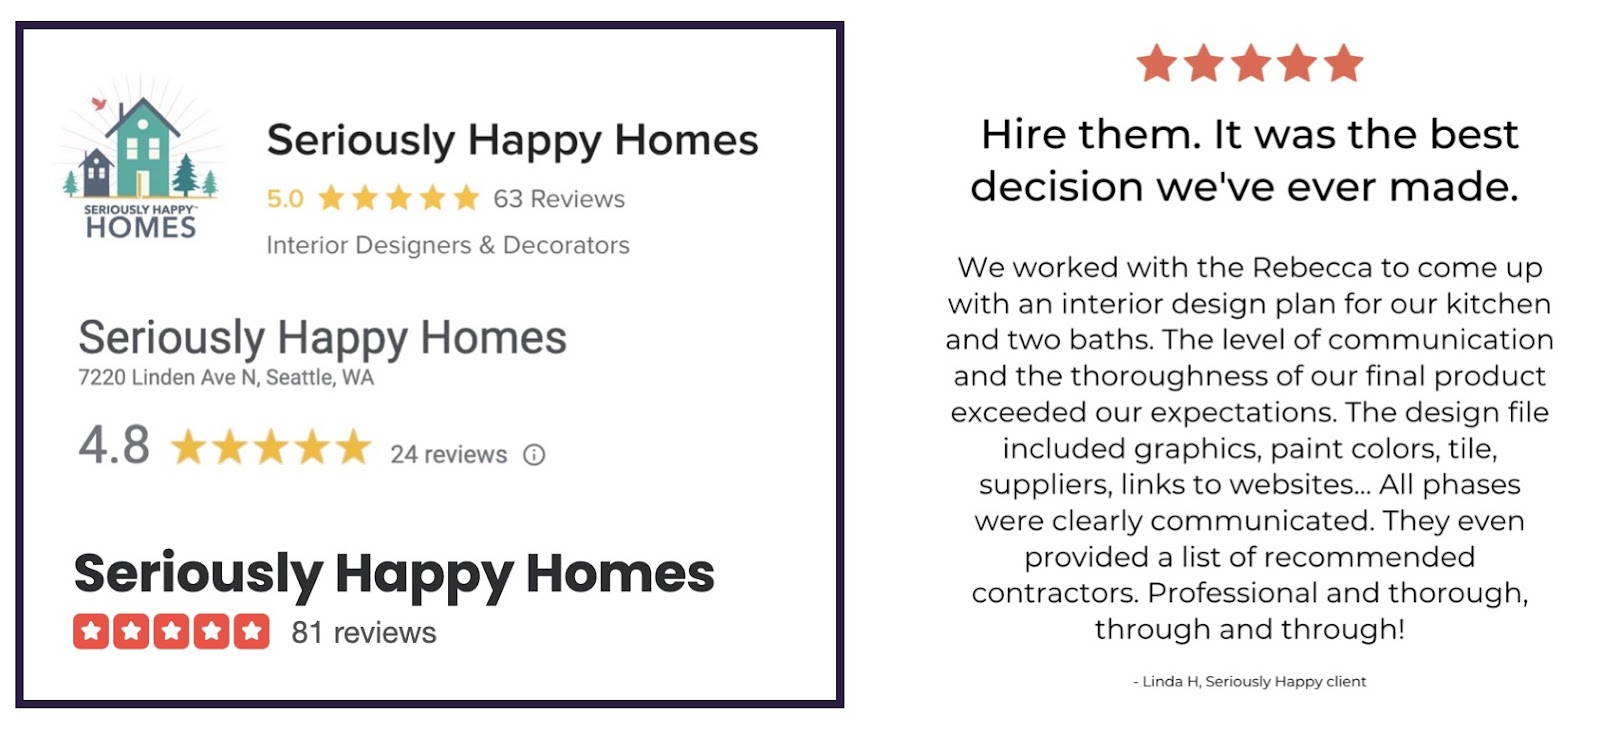 seriously-happy-homes